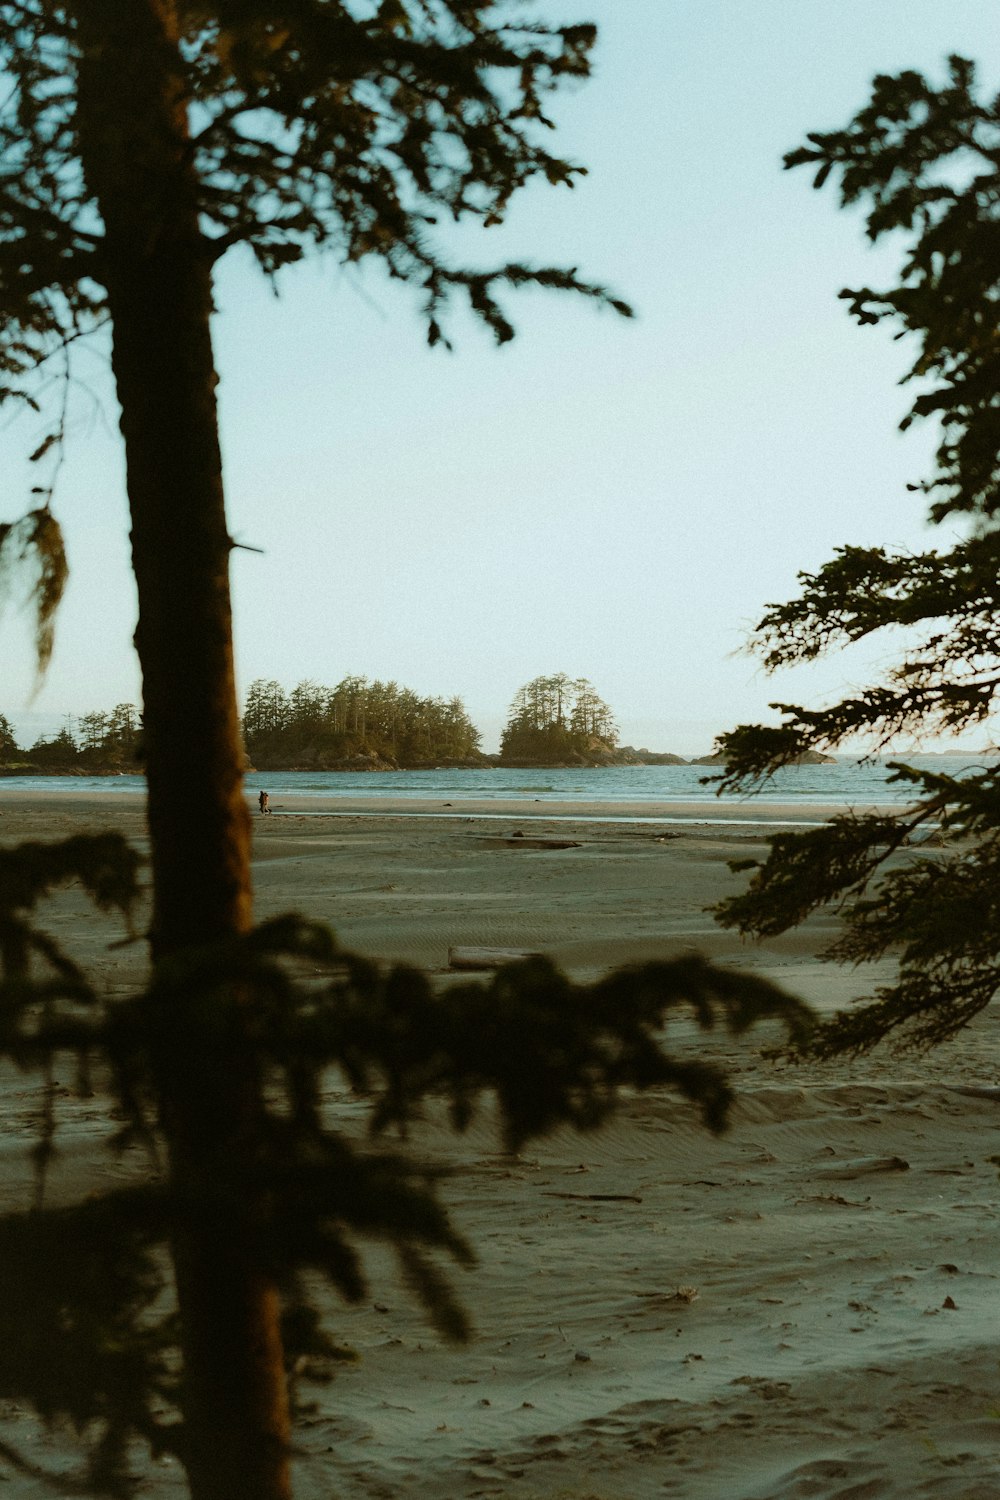 a couple of trees sitting on top of a sandy beach